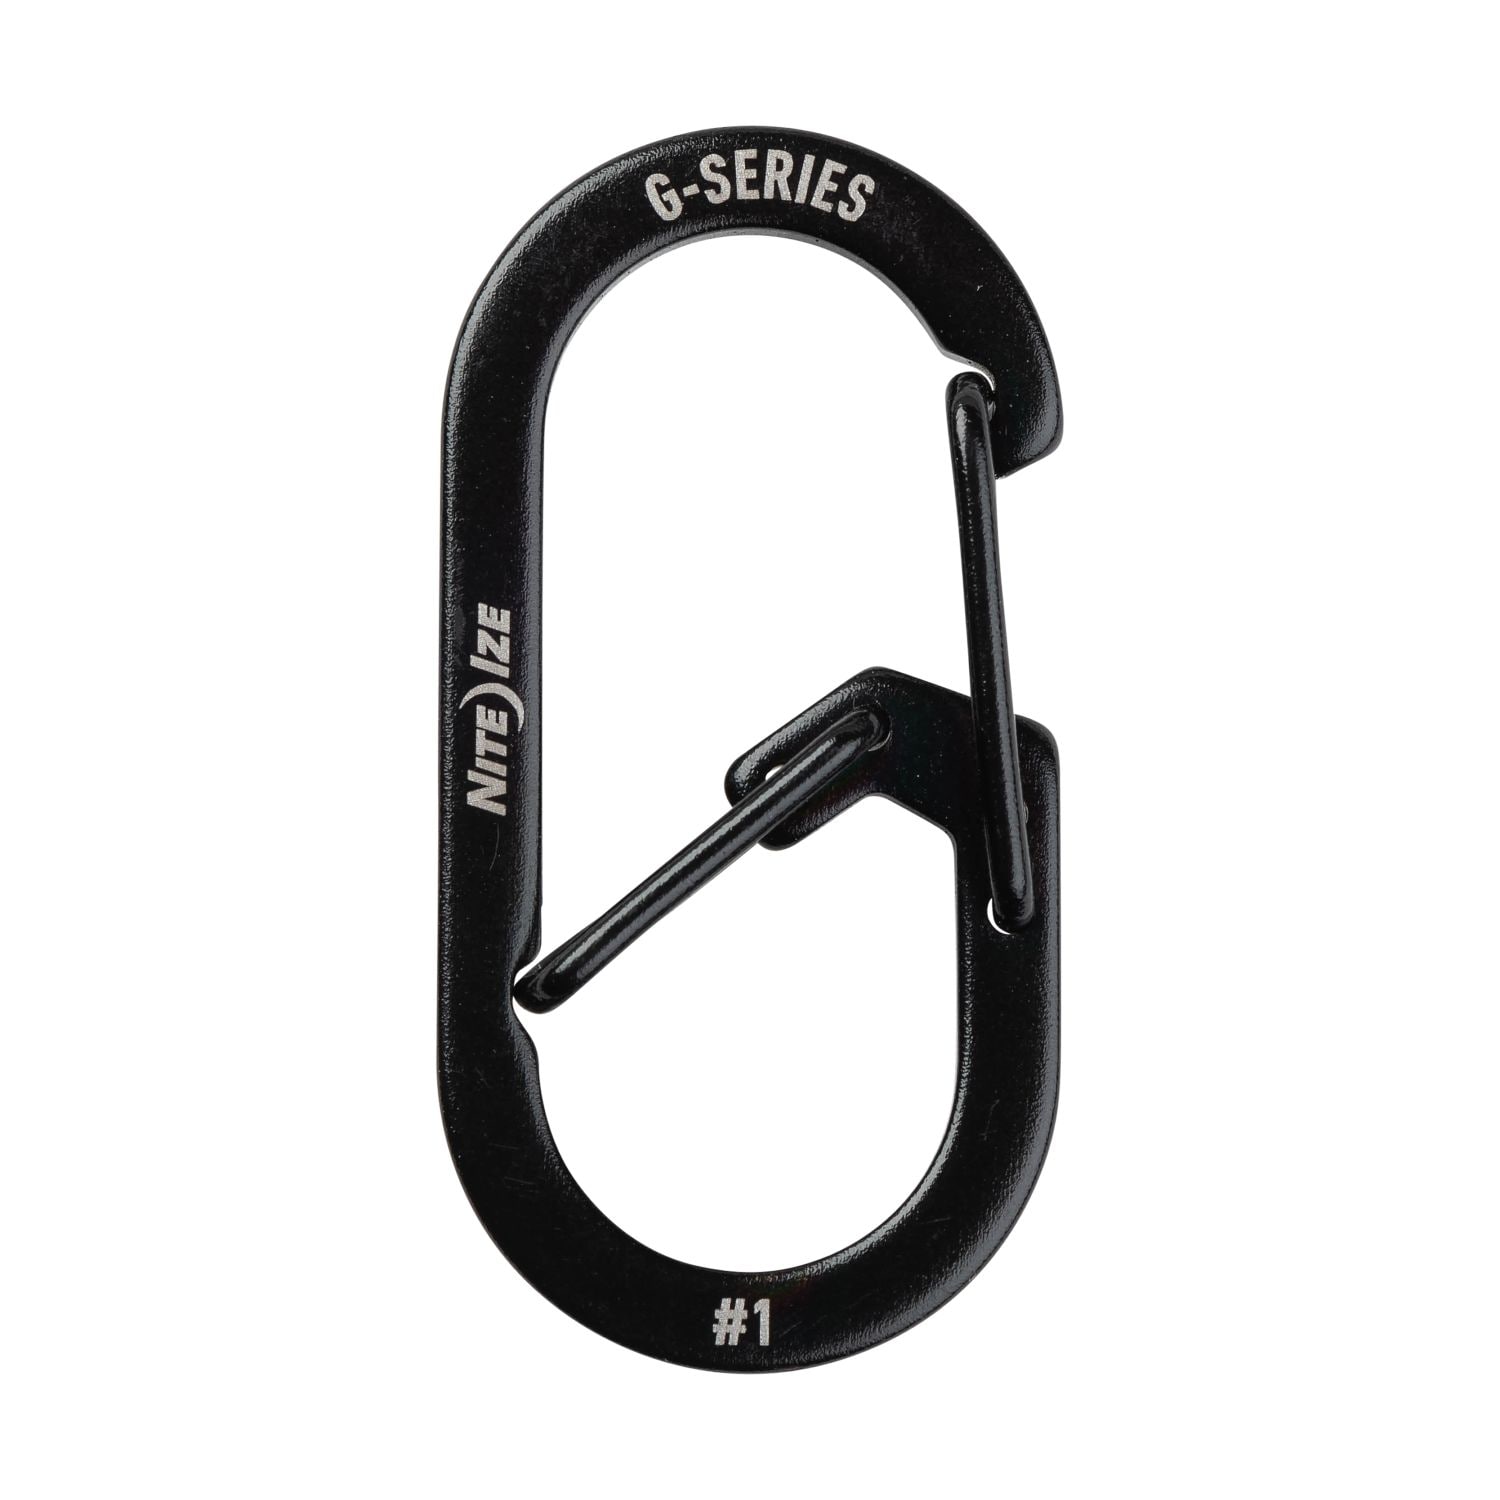 Nite Ize 2-Pack Black Snap-hook Key Ring in the Key Accessories